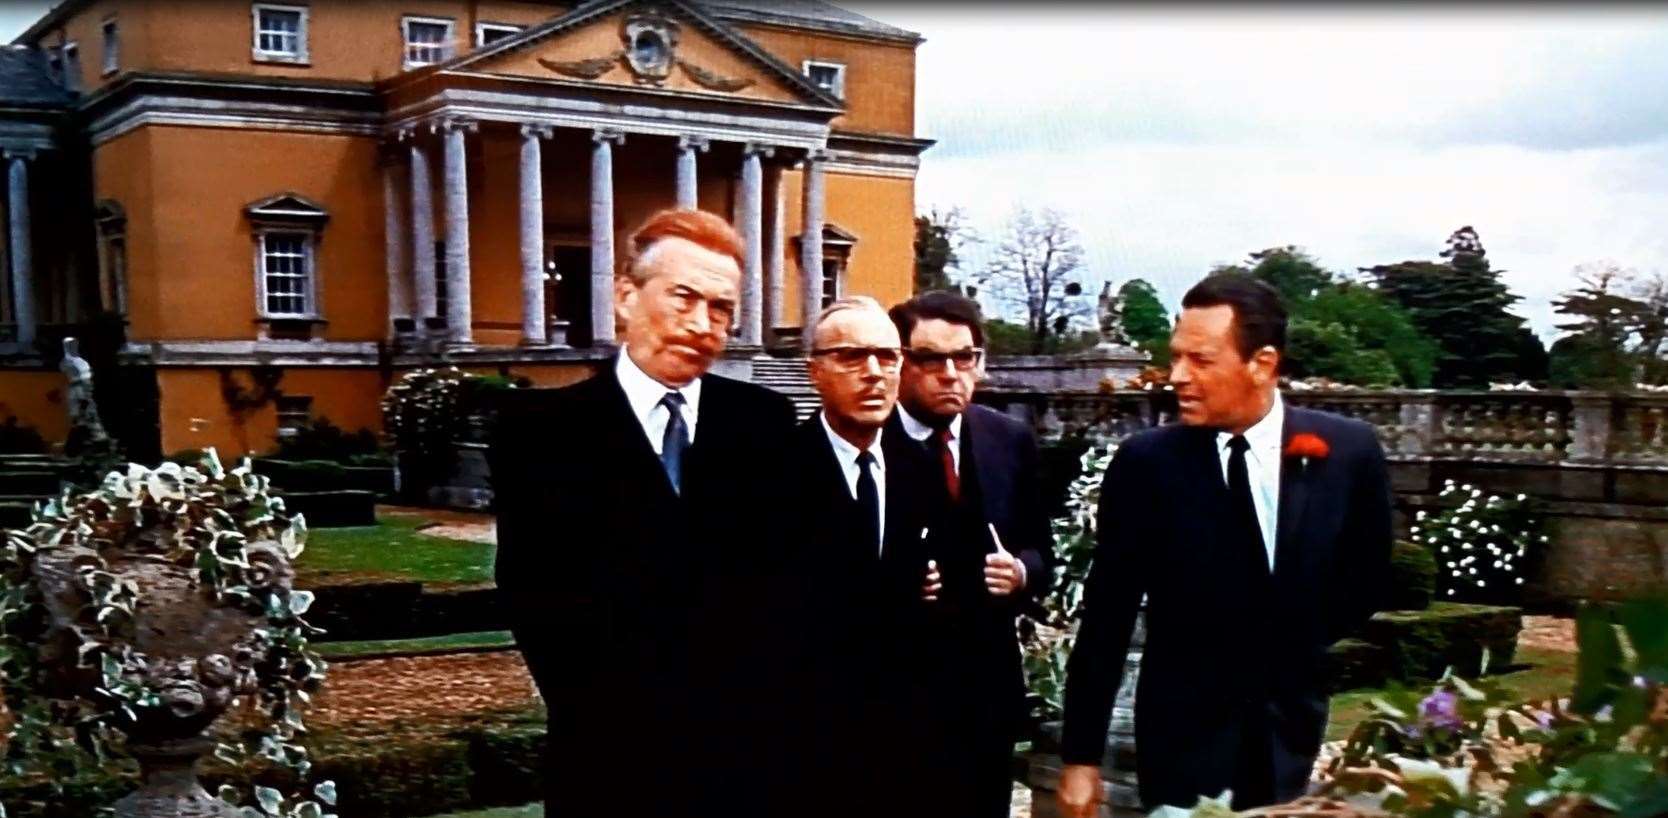 The spies at Mereworth Castle: played by John Huston, Charles Boyer, Kurt Kasznar and William Holden